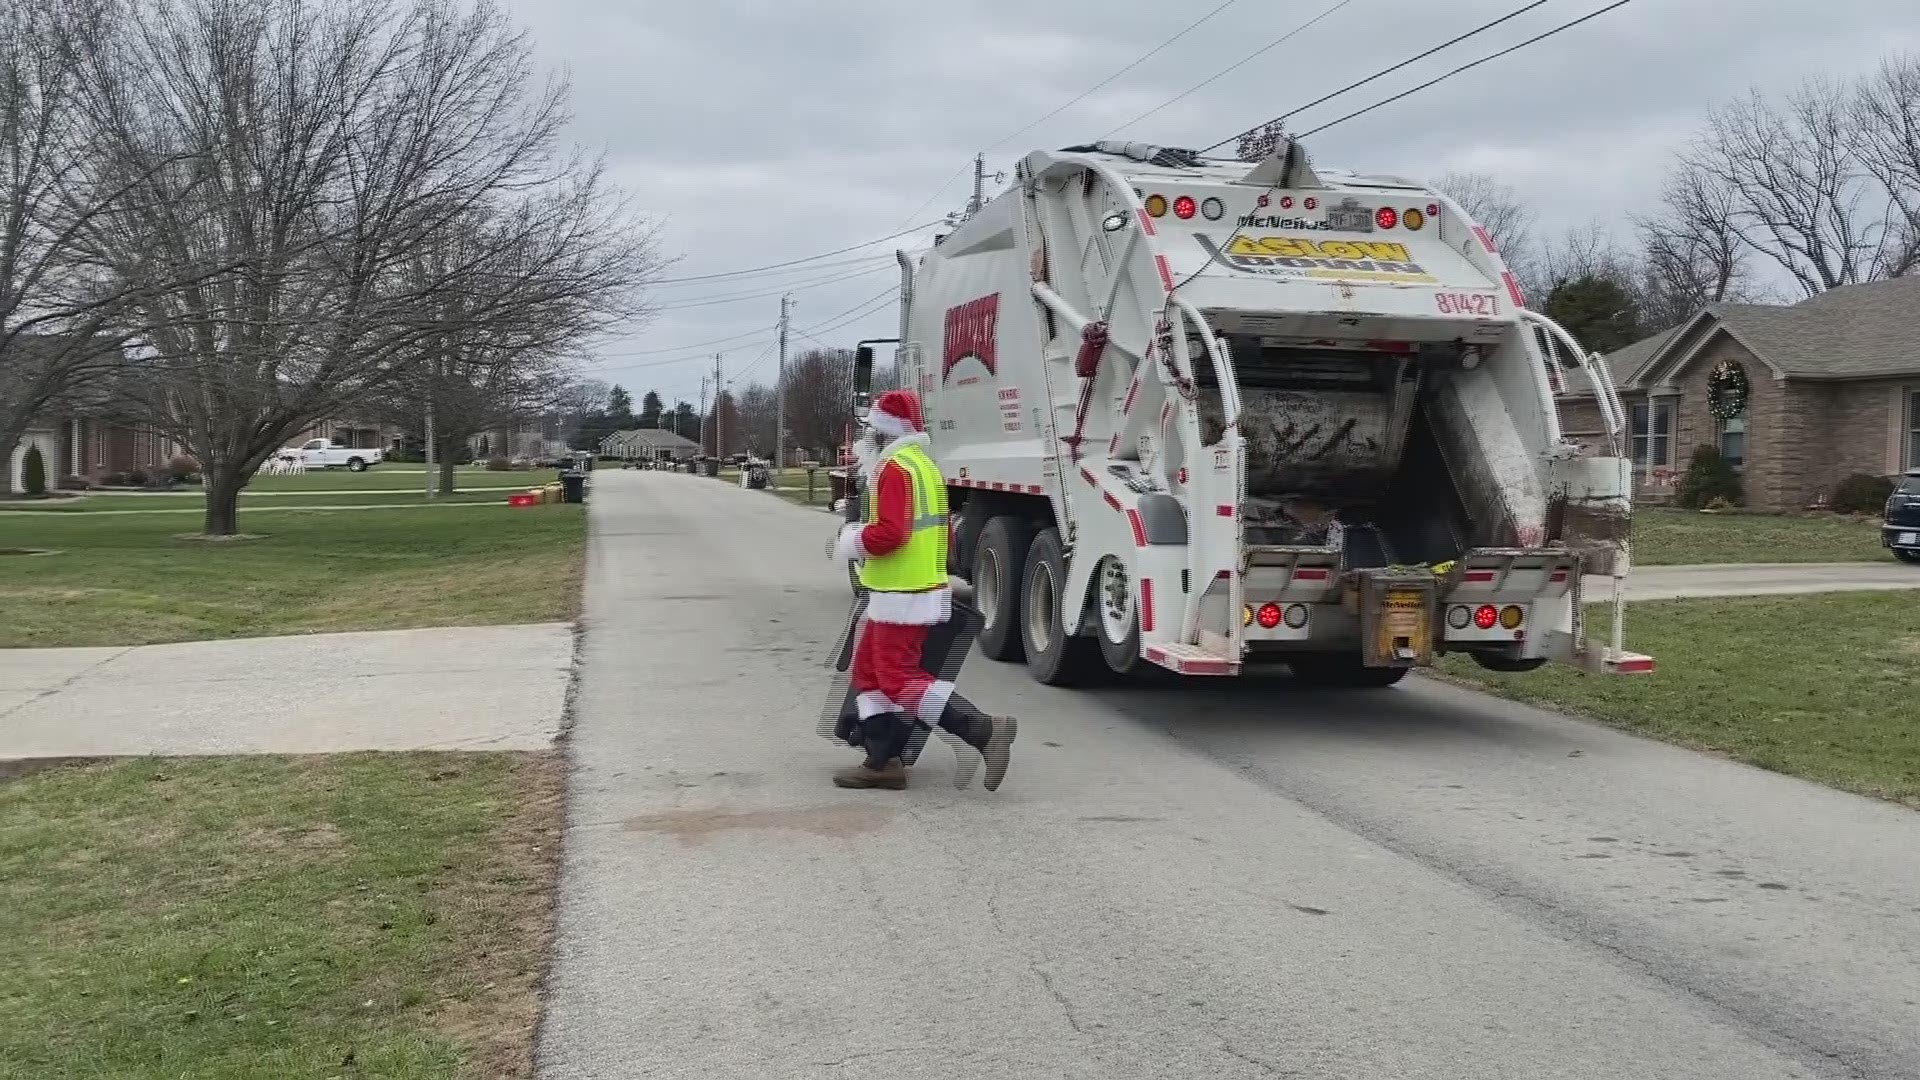 Tyler Lilly, a Rumpke team member, surprised Mt. Washington residents by picking up trash in a full Santa costume.